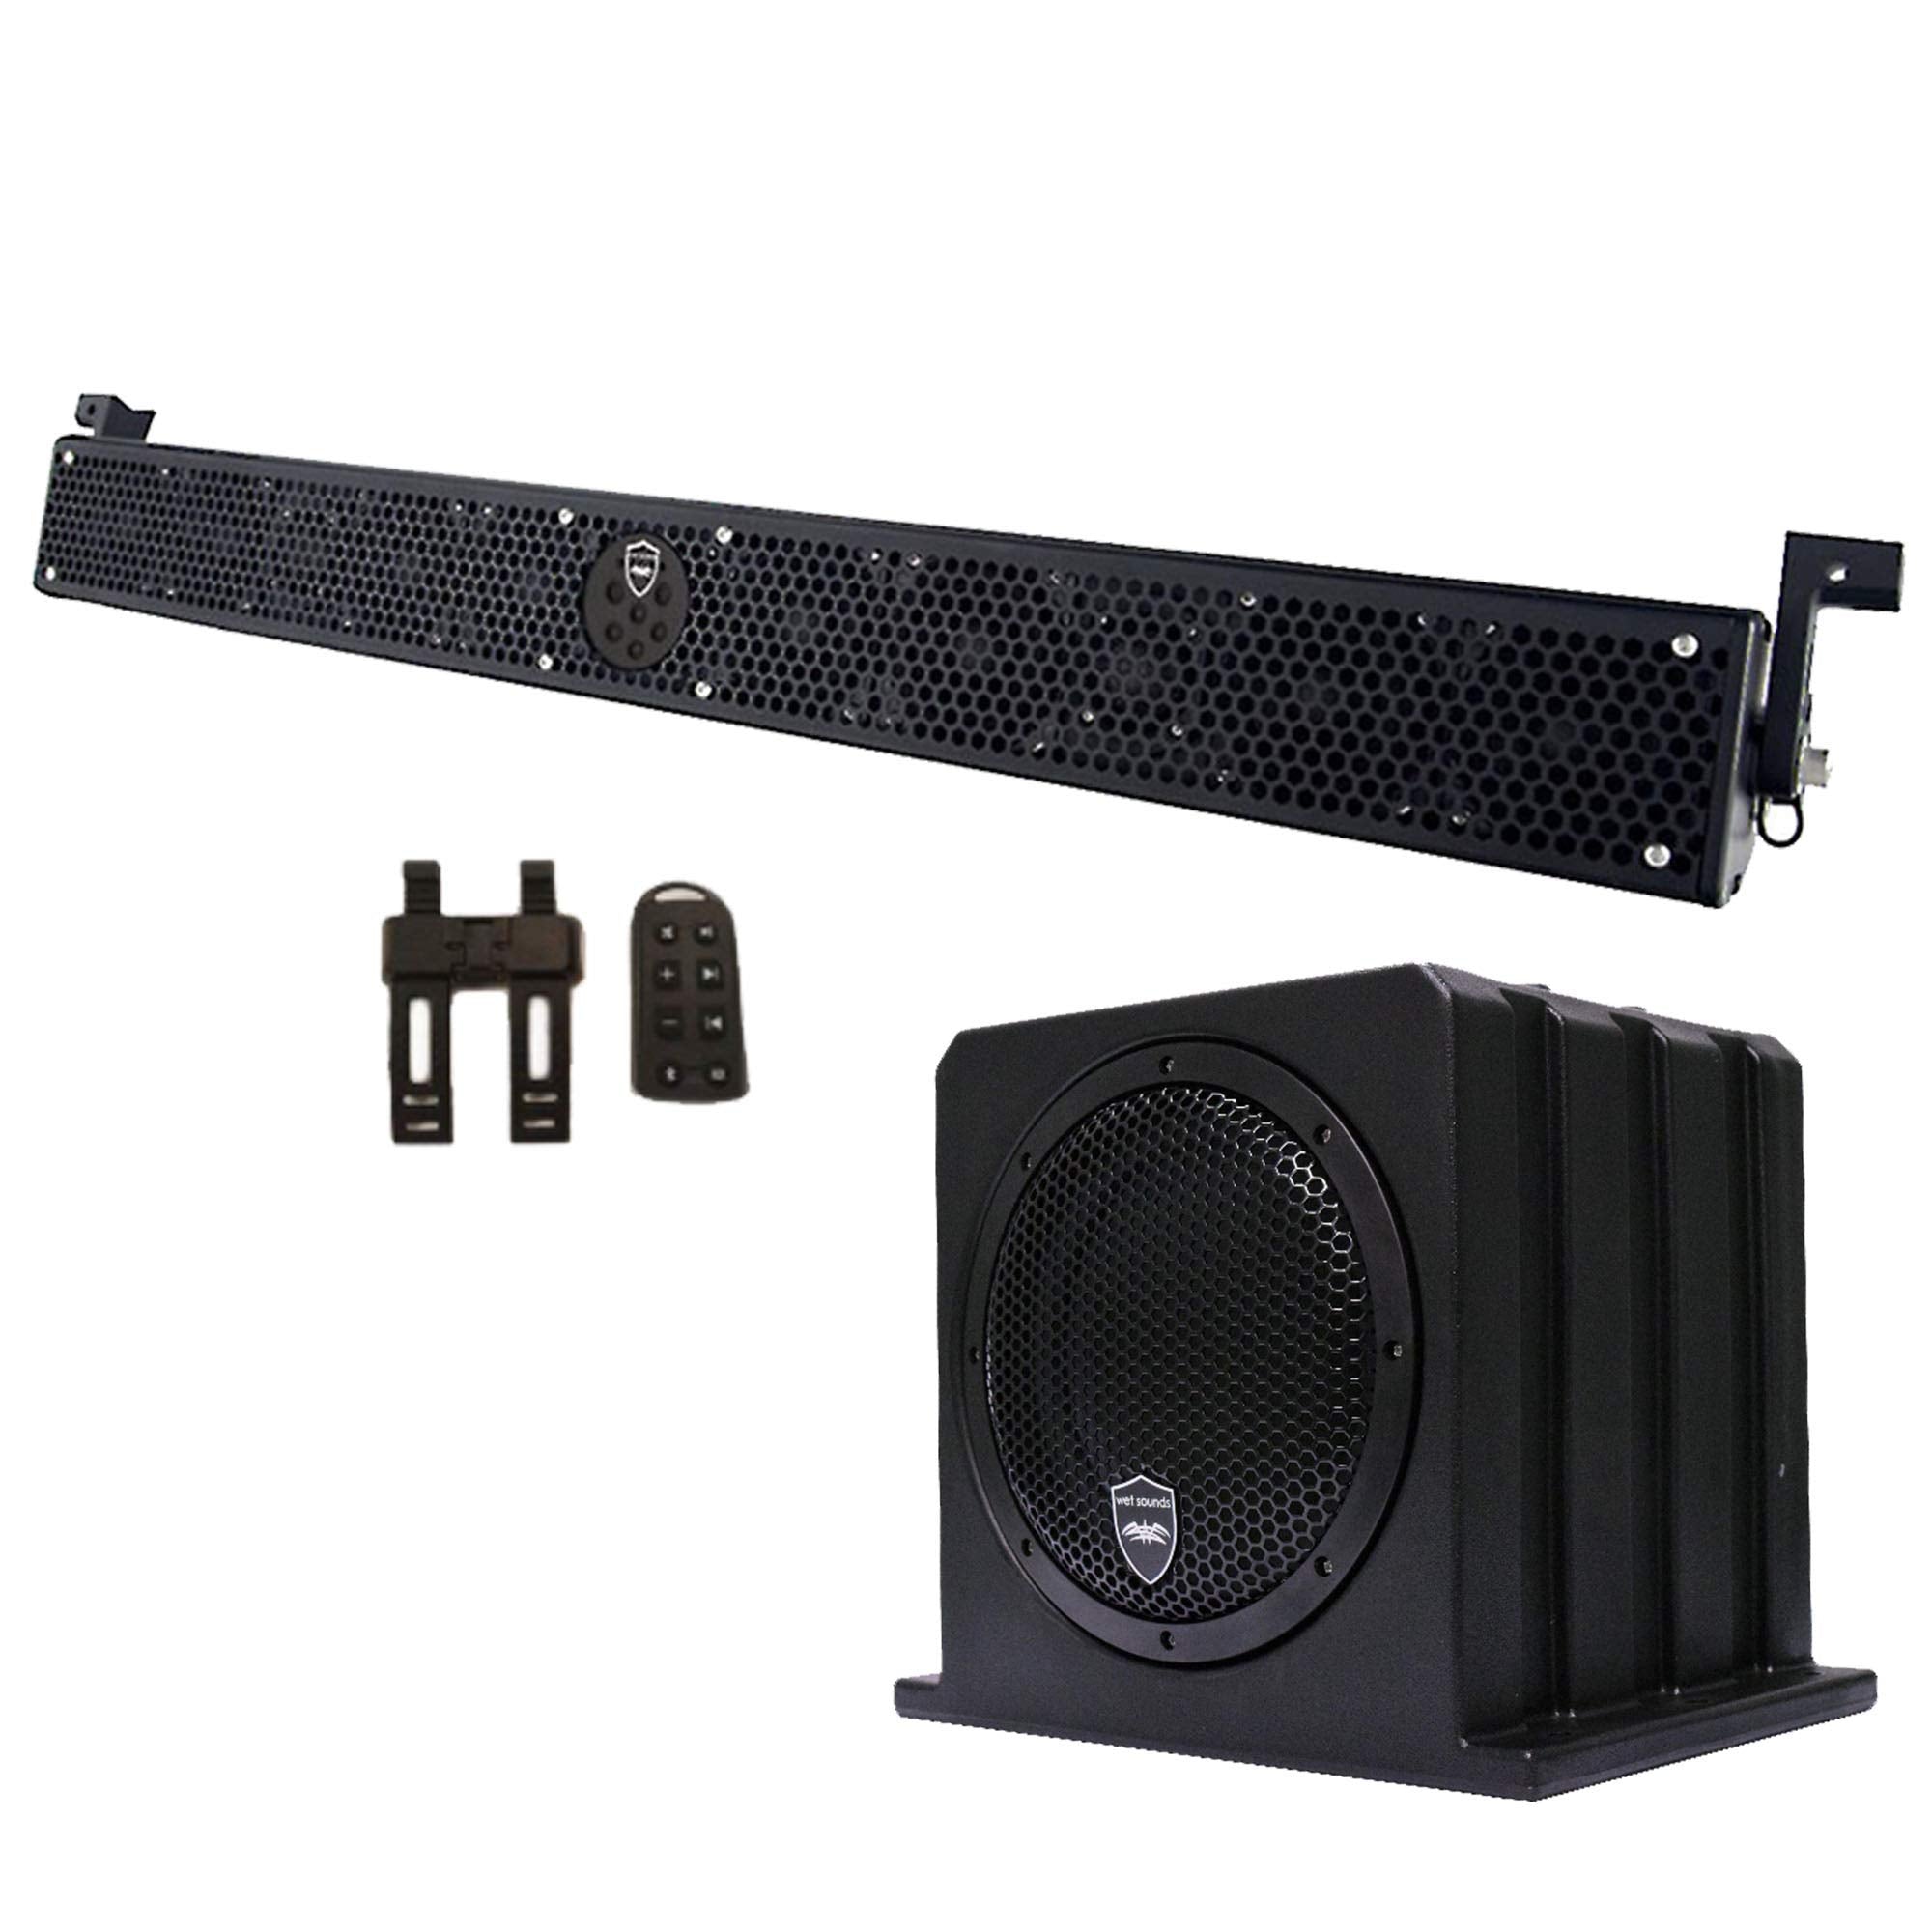 wet sounds Package - Black Stealth 10 Ultra HD Sound Bar